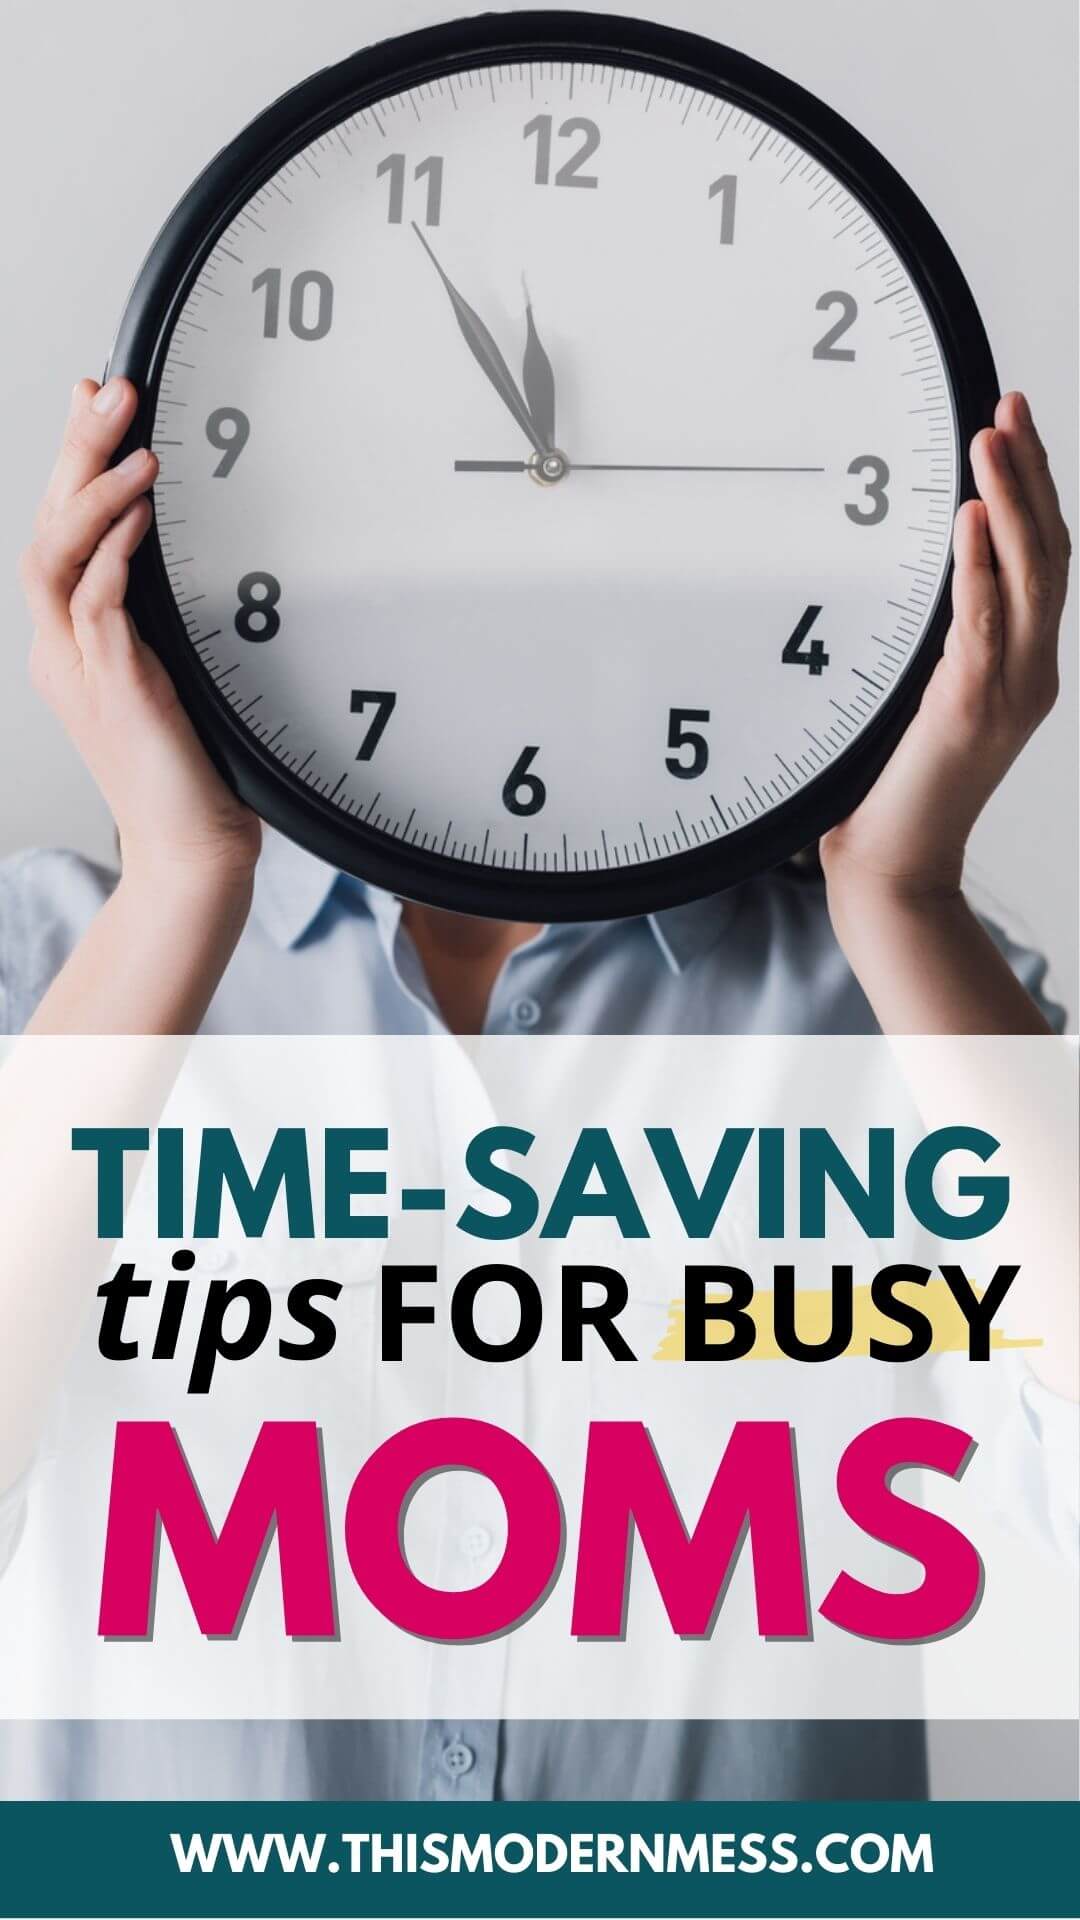 Woman holding clock, overlaid with the words "Time Saving Tips for Busy Moms"